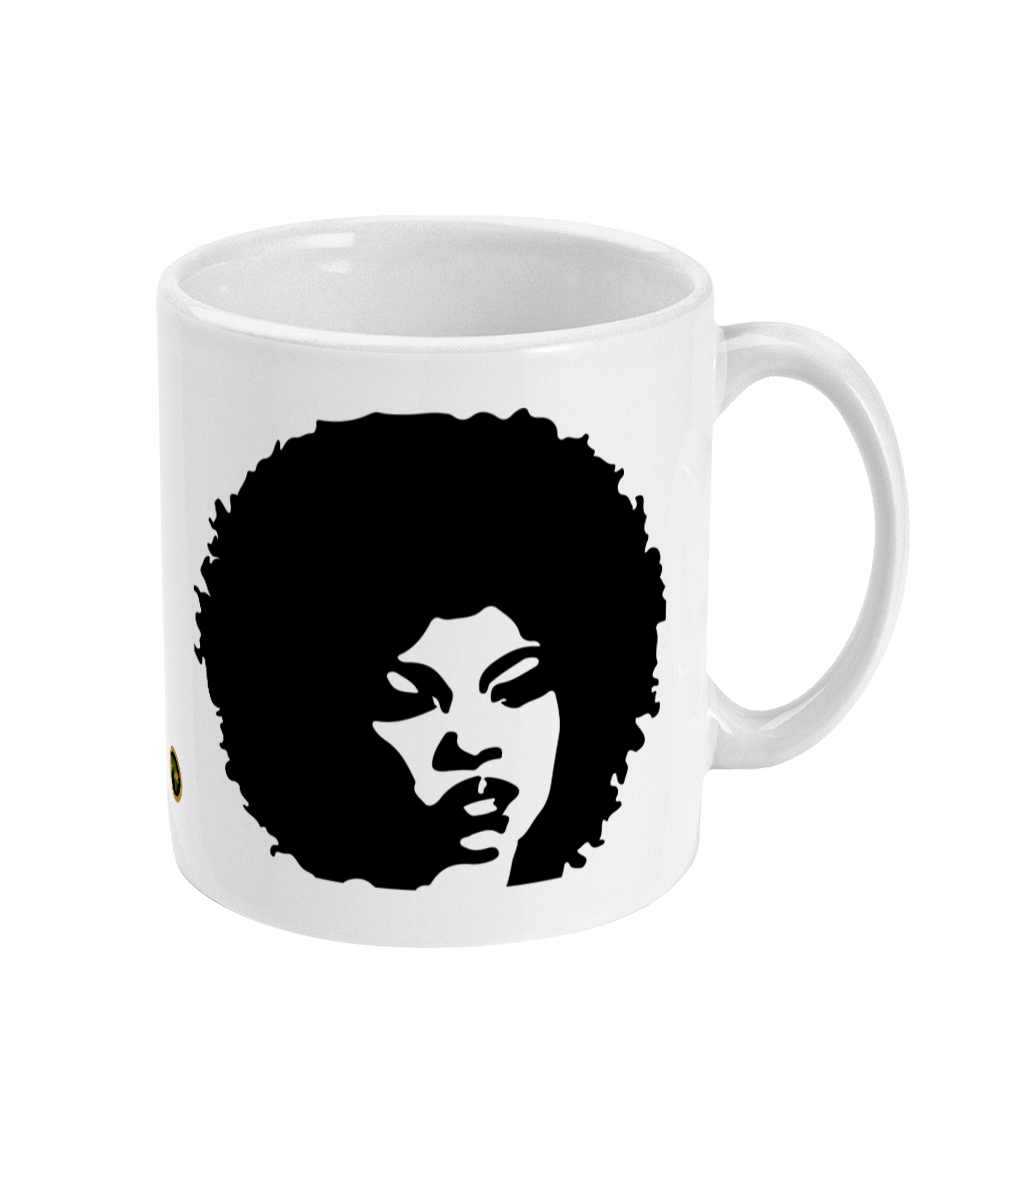 Black Girl Afro Cup